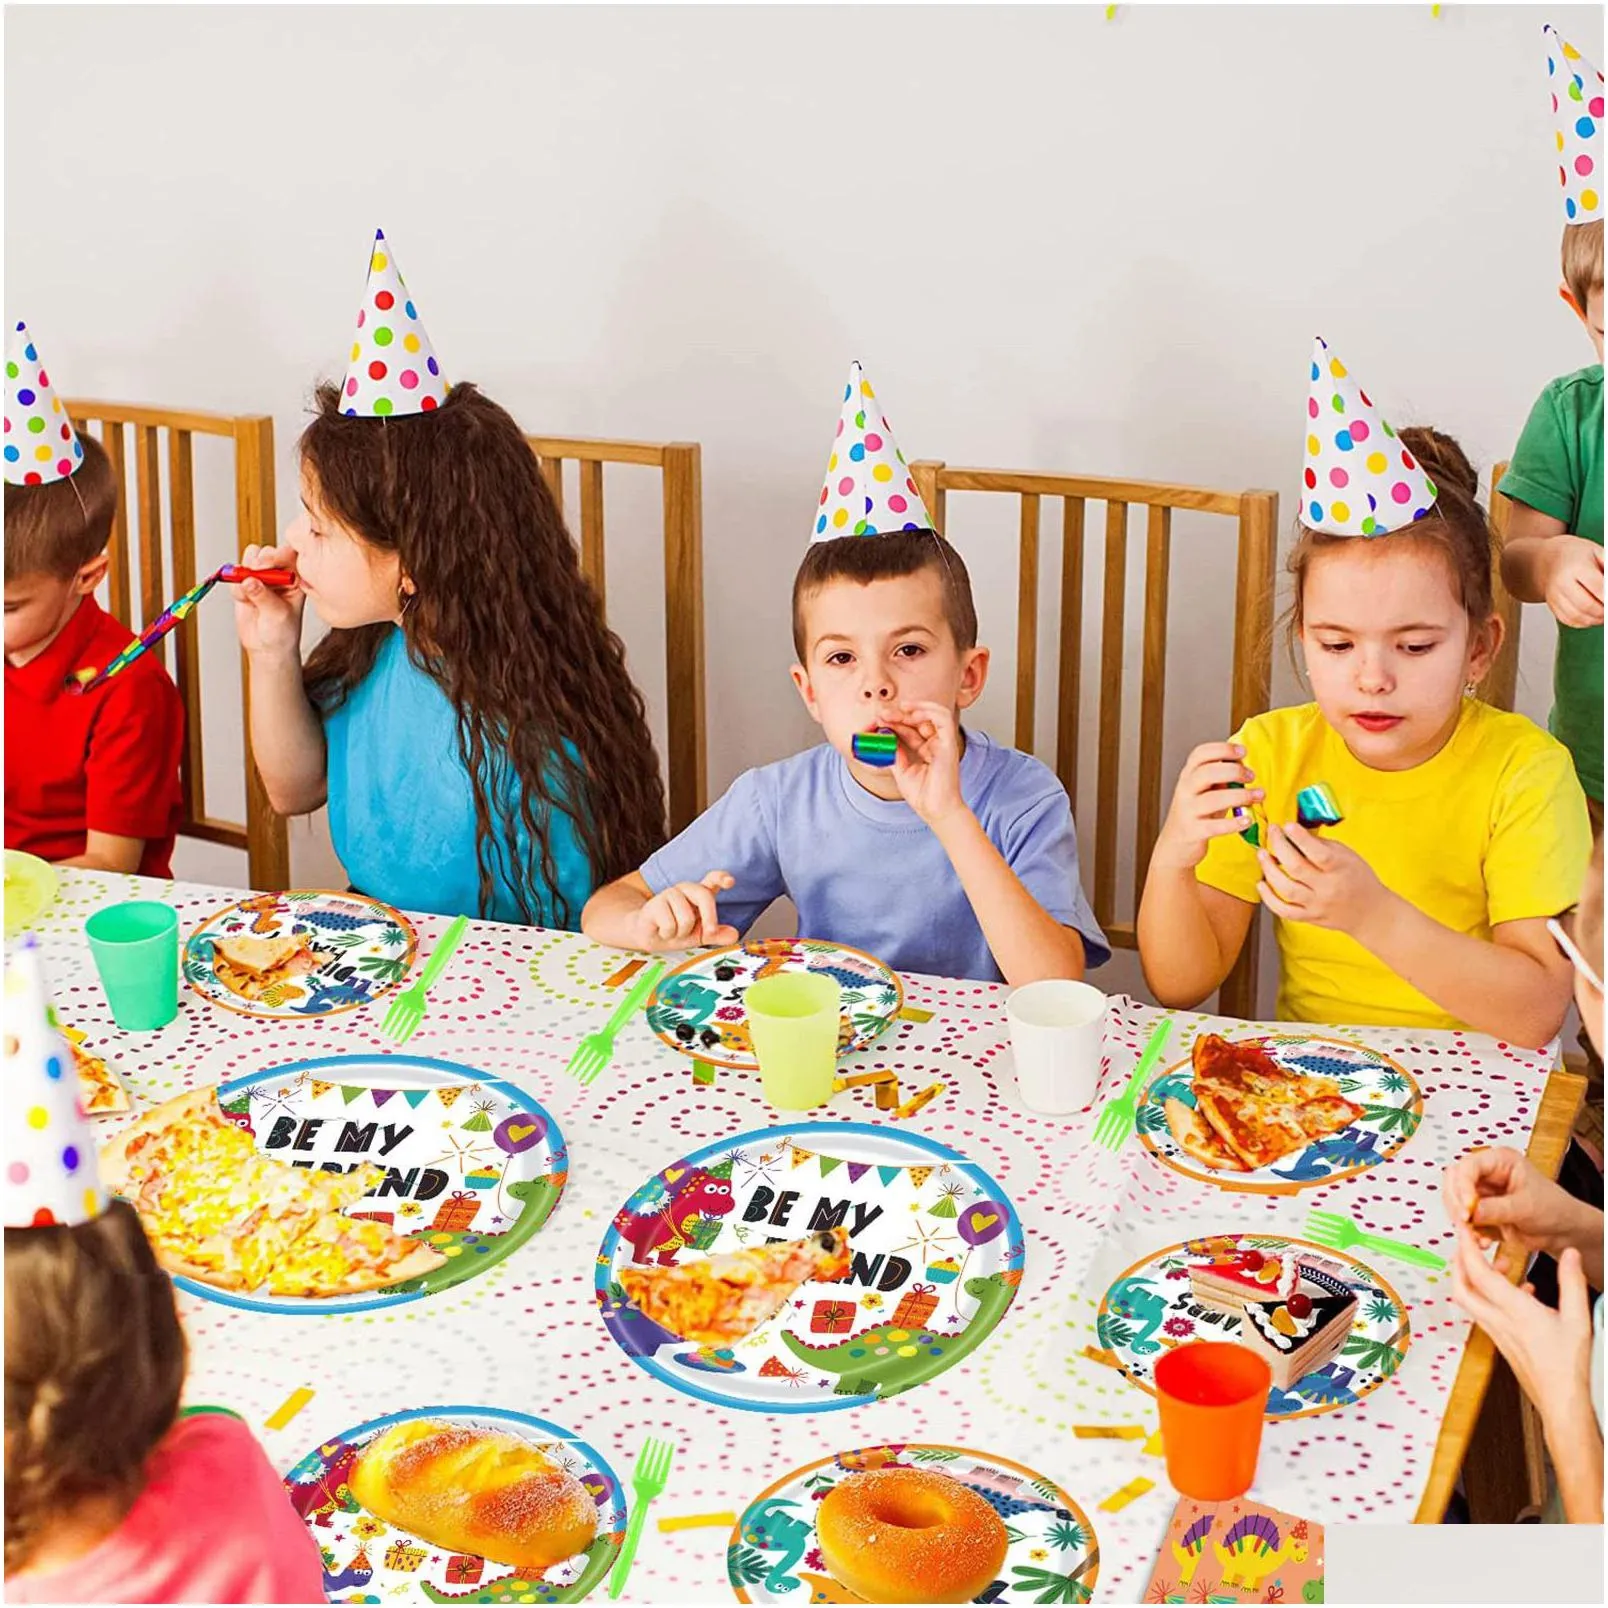 dinosaur plates birthday dinnerware tableware disposable paper plate value party supplies serves 16 for kids includes plates, napkins, forks